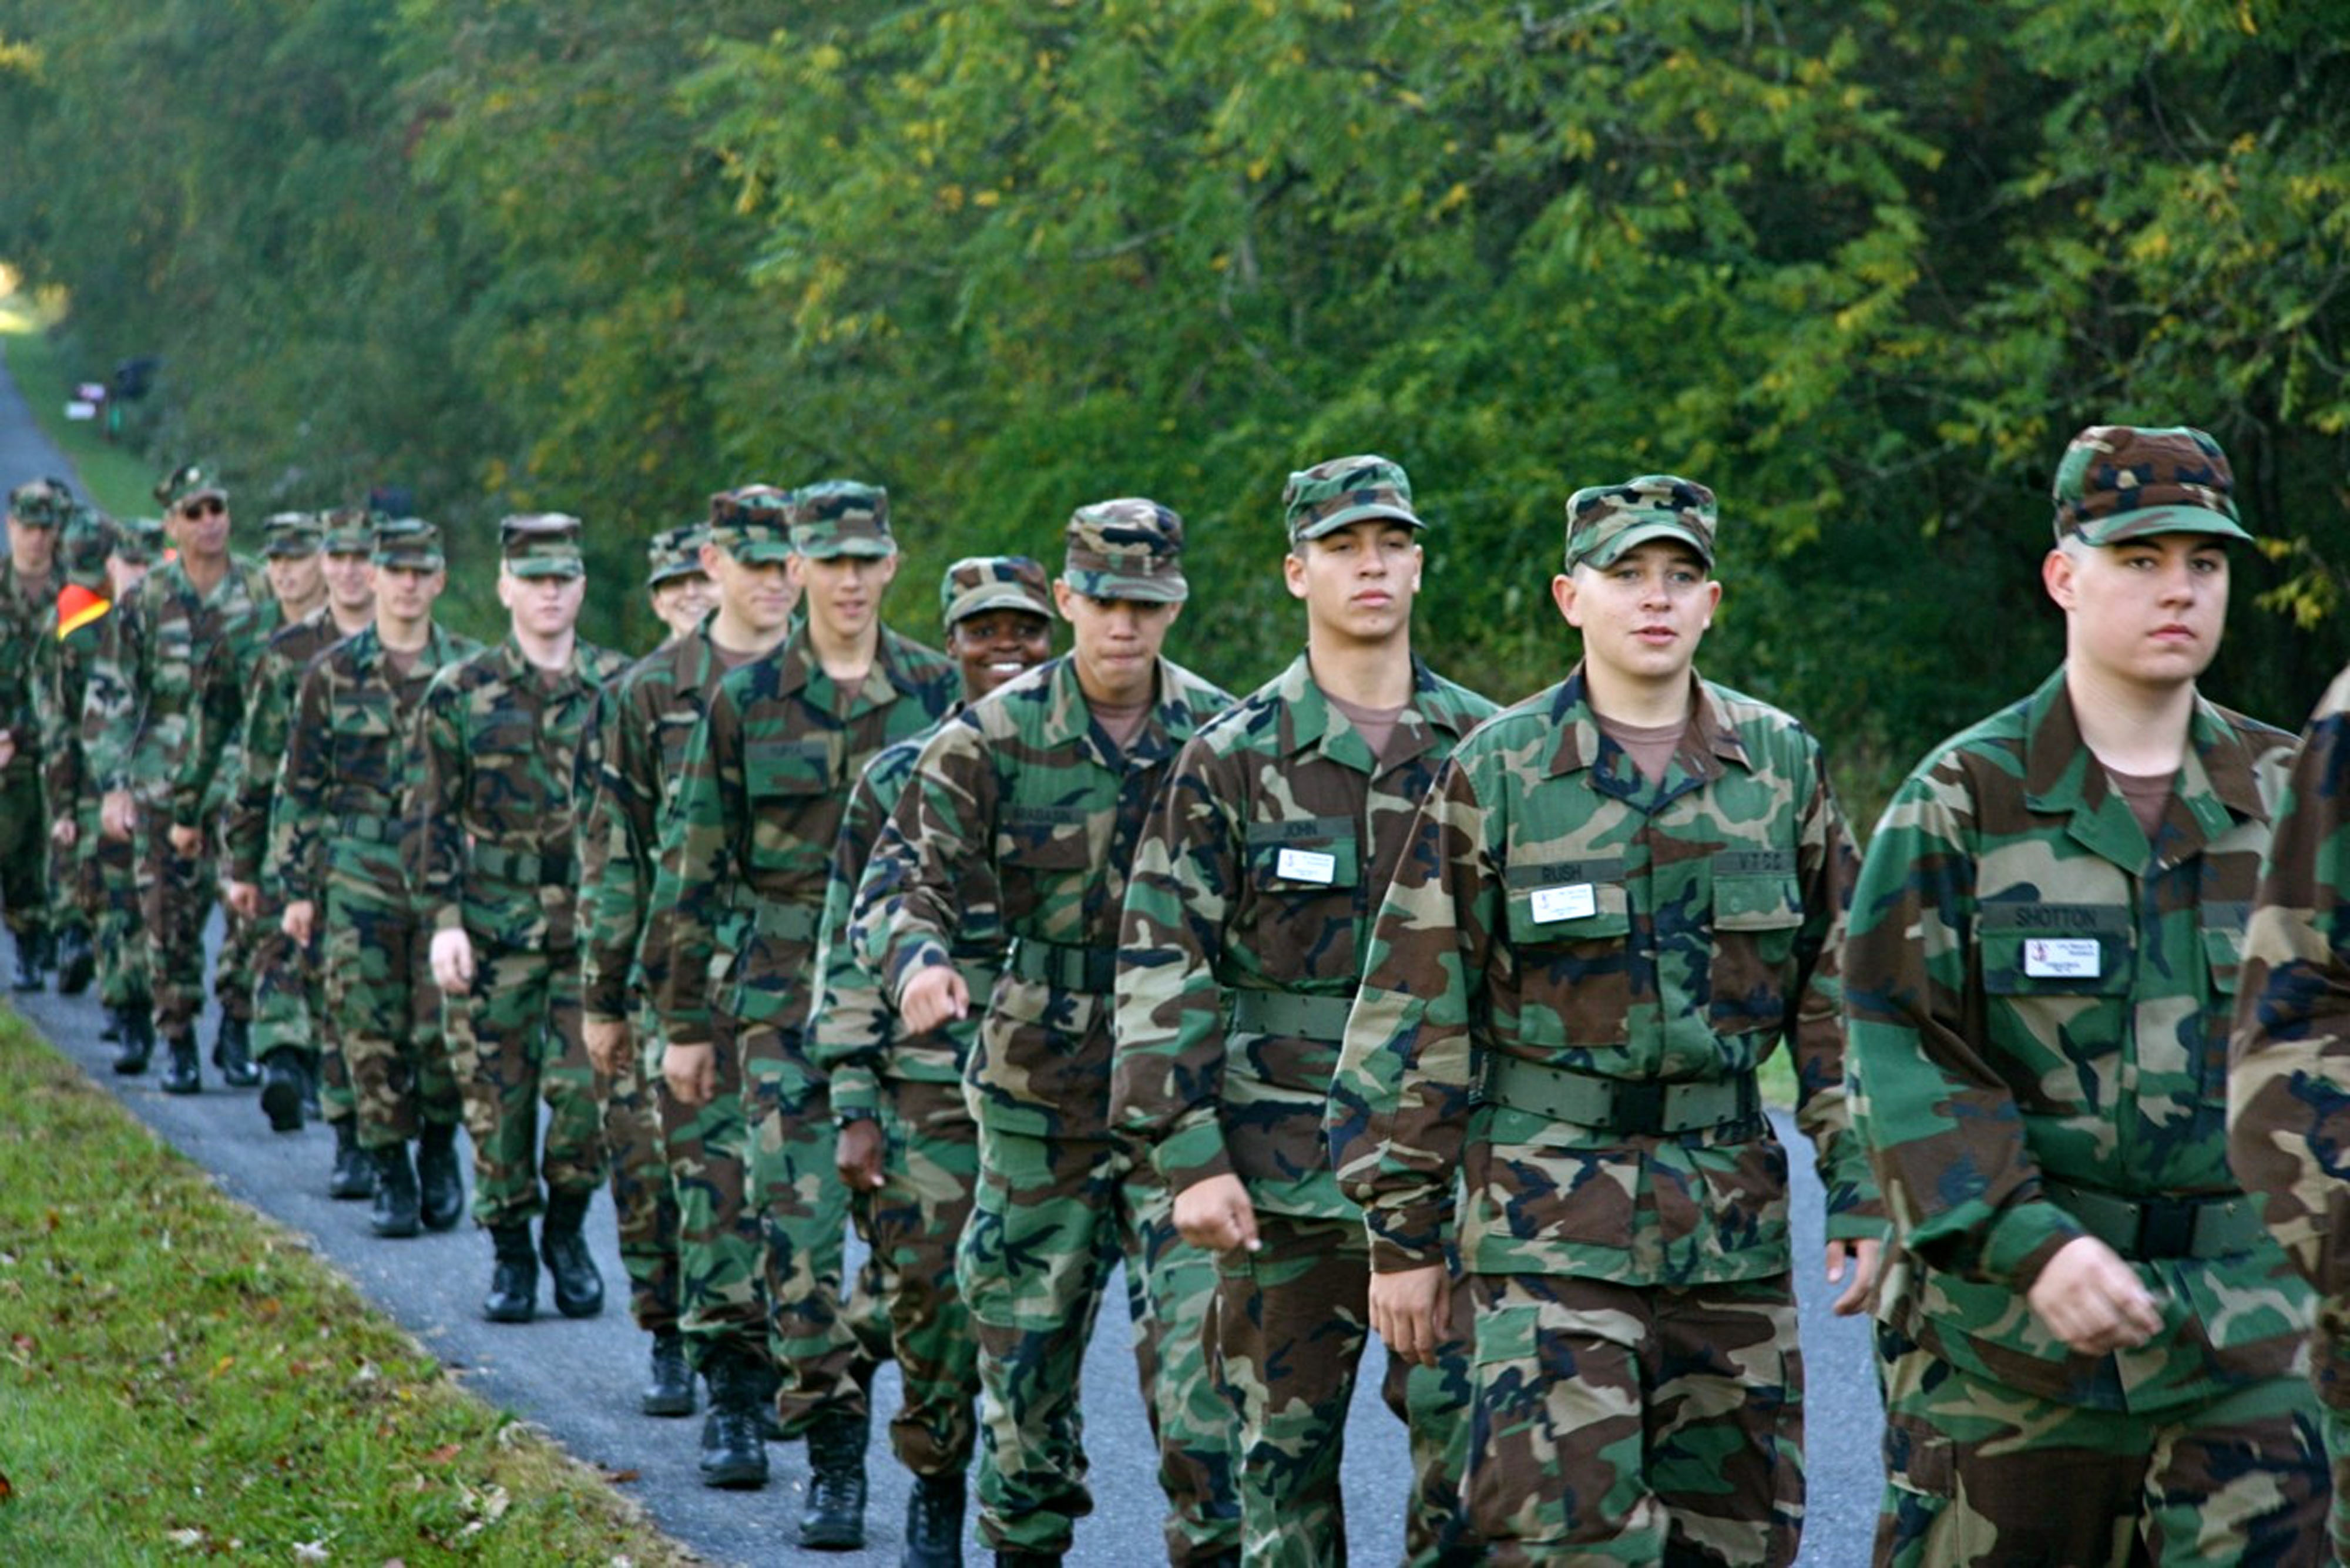 Members of the Virginia Tech Corps of Cadets Class of 2014 take part in the Fall Caldwell March last September